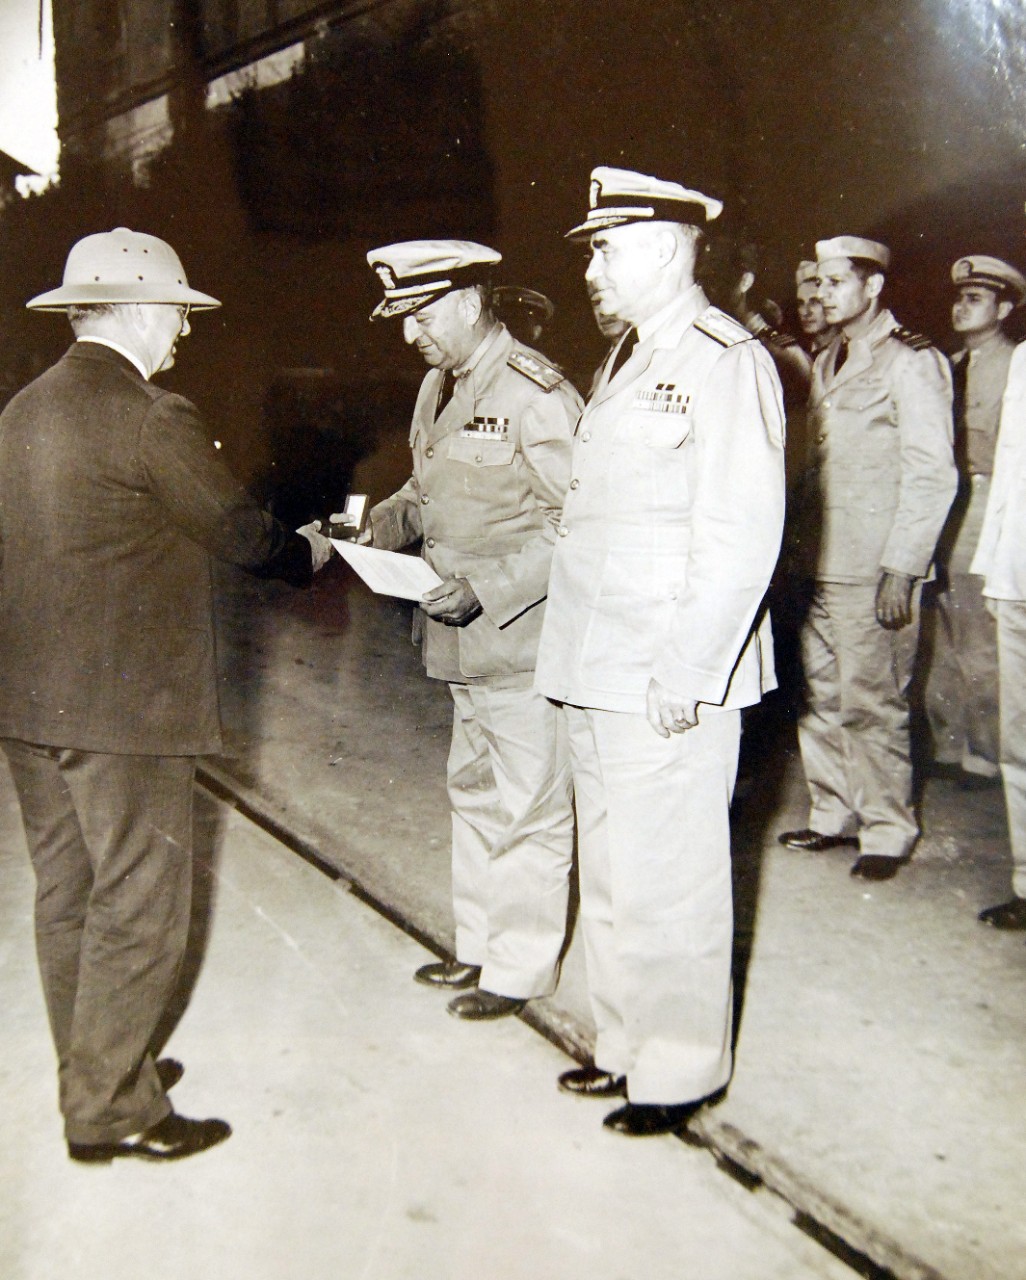 <p>LC-Lot-4263-15: Secretary of the Navy Frank Knox presents Vice Admiral H.K. Hewitt the Distinguished Service Medal, though not identified, the Medal was probably the U.S. Army Distinguished Service Medal for Operation Torch, November 1942.&nbsp;</p>
